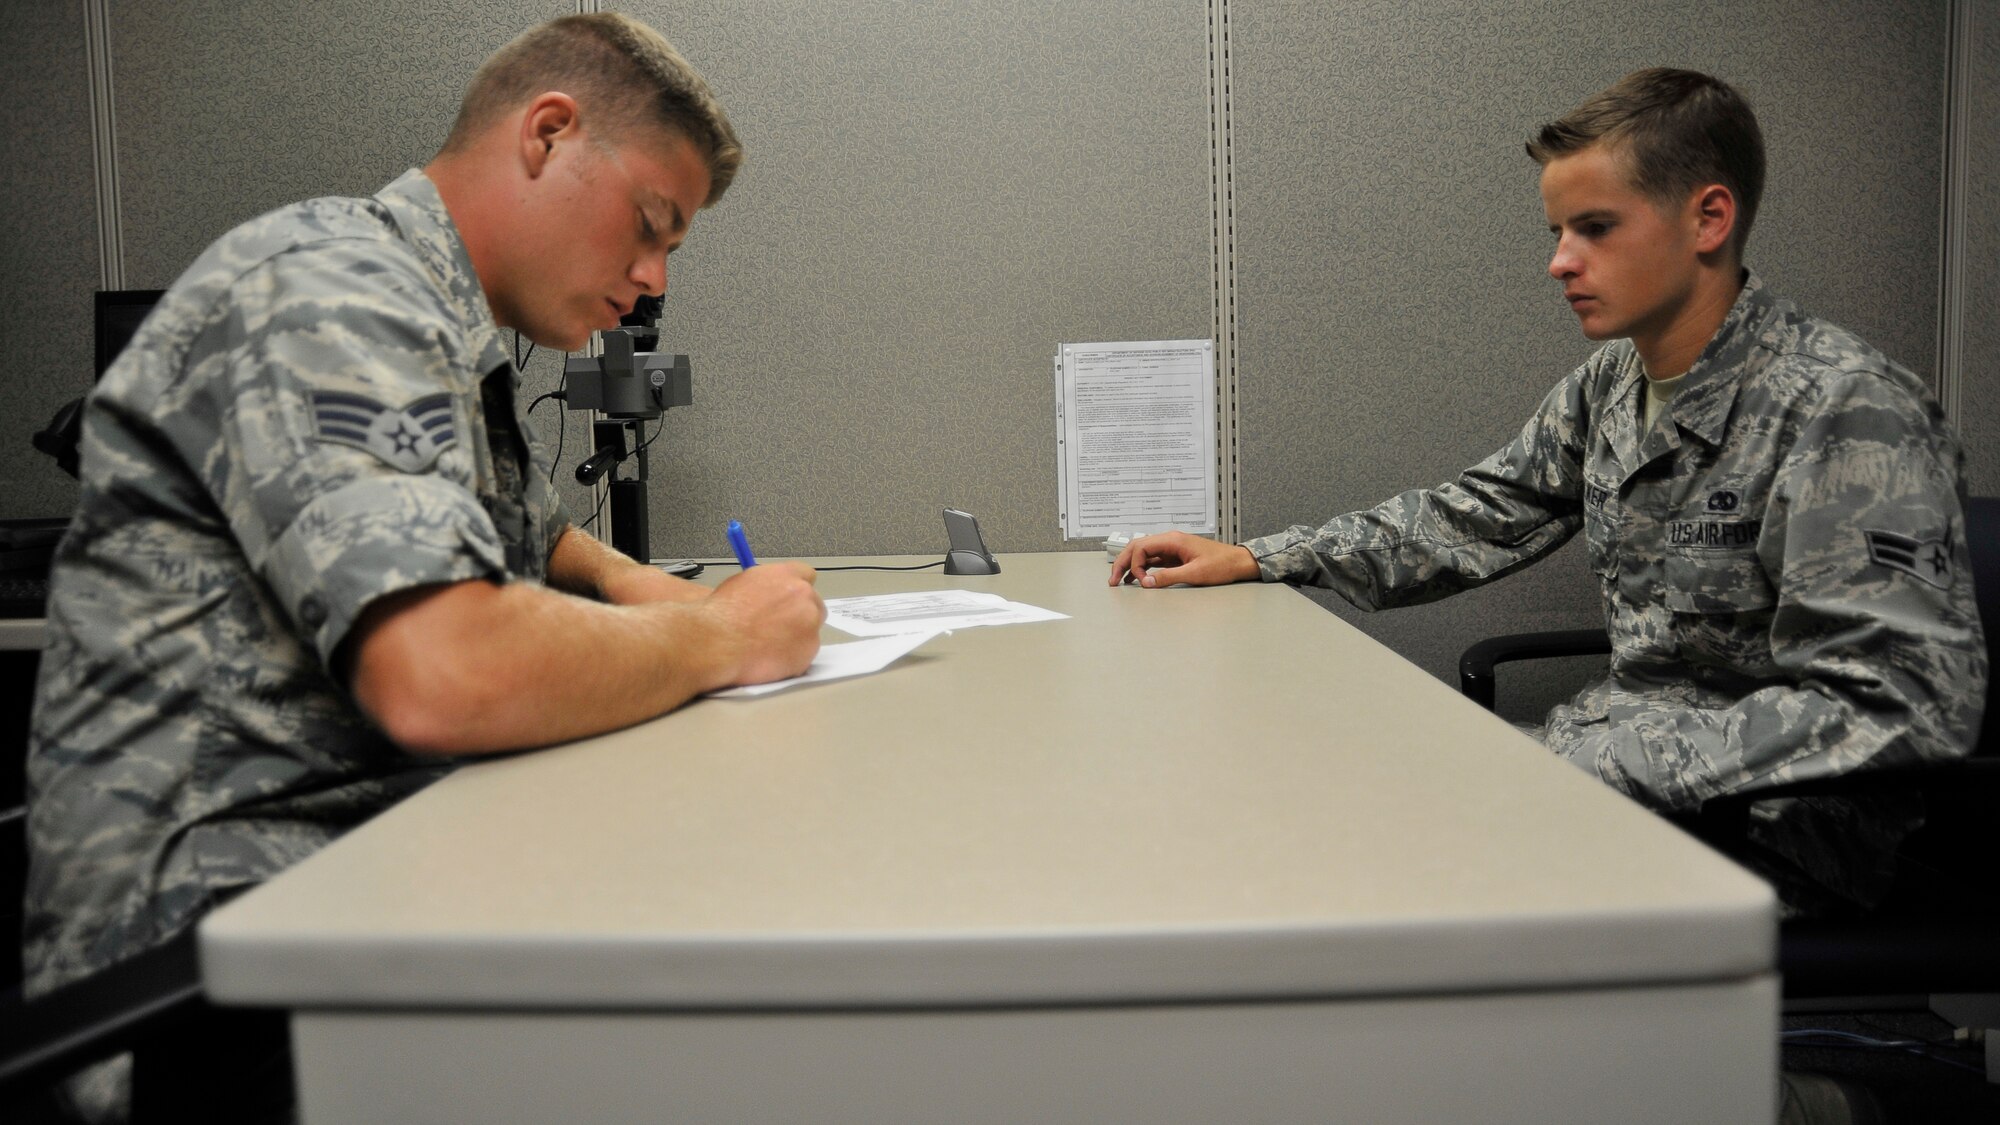 Senior Airman James Johnson, 325th Force Support Squadron customer support floor supervisor, assists Airman 1st Class Austin Walker, 325th Maintenance Squadron low observable technician, with paper work June 10 at the Military Personnel Support customer support center. The MPS customer support center issues identifications such as Common Access Cards. (U.S. Air Force photo by Airman 1st Class Solomon Cook)  

